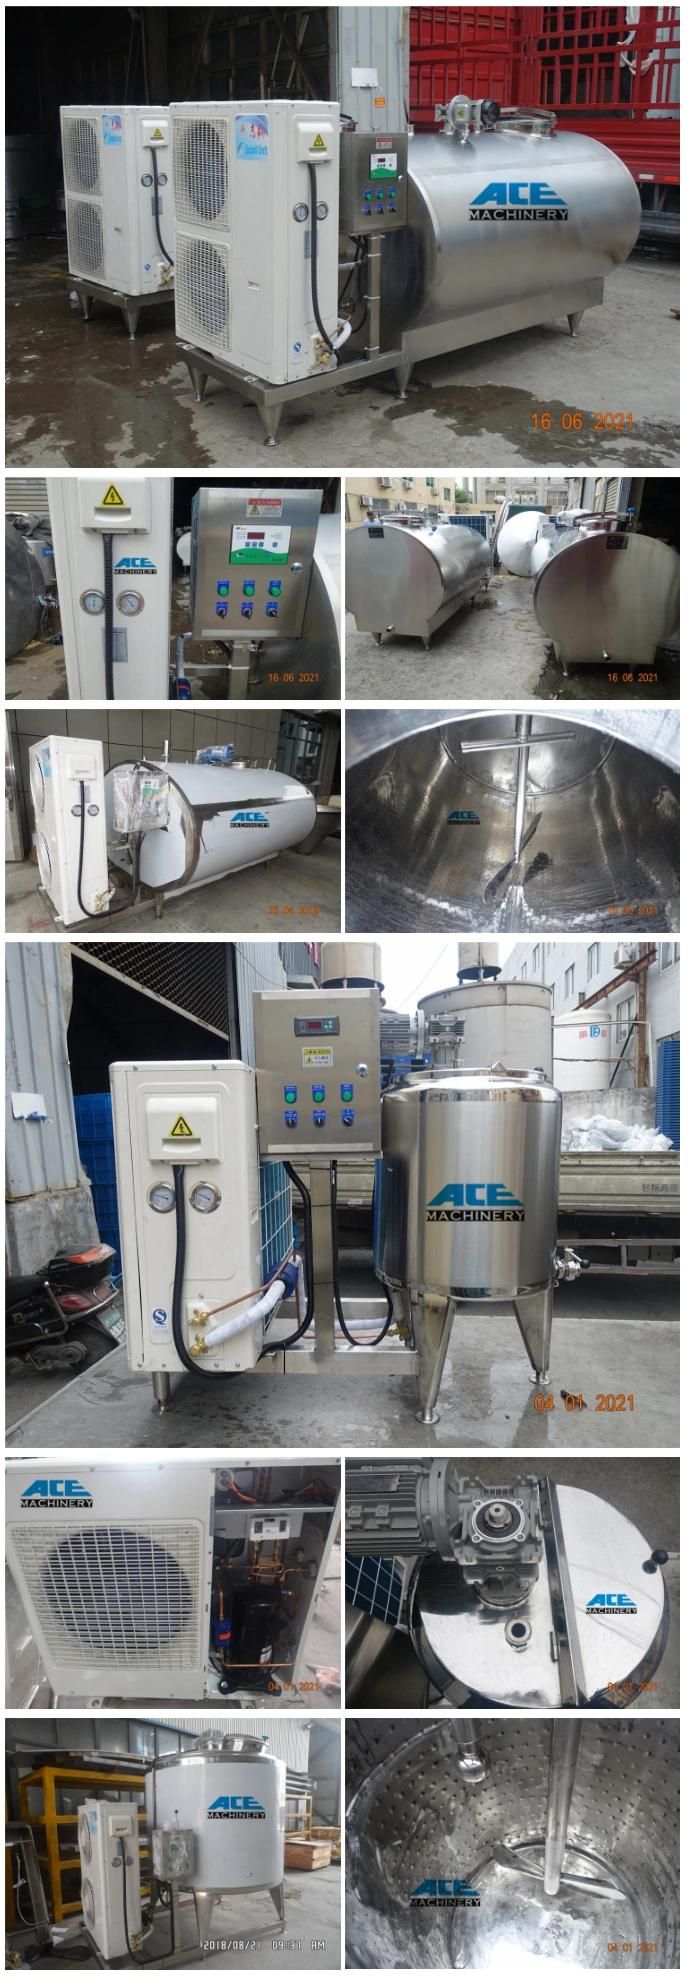 Best Price 500L 1000 Liter Small Stainless Steel Immersion Bulk Milk Cooling Tank